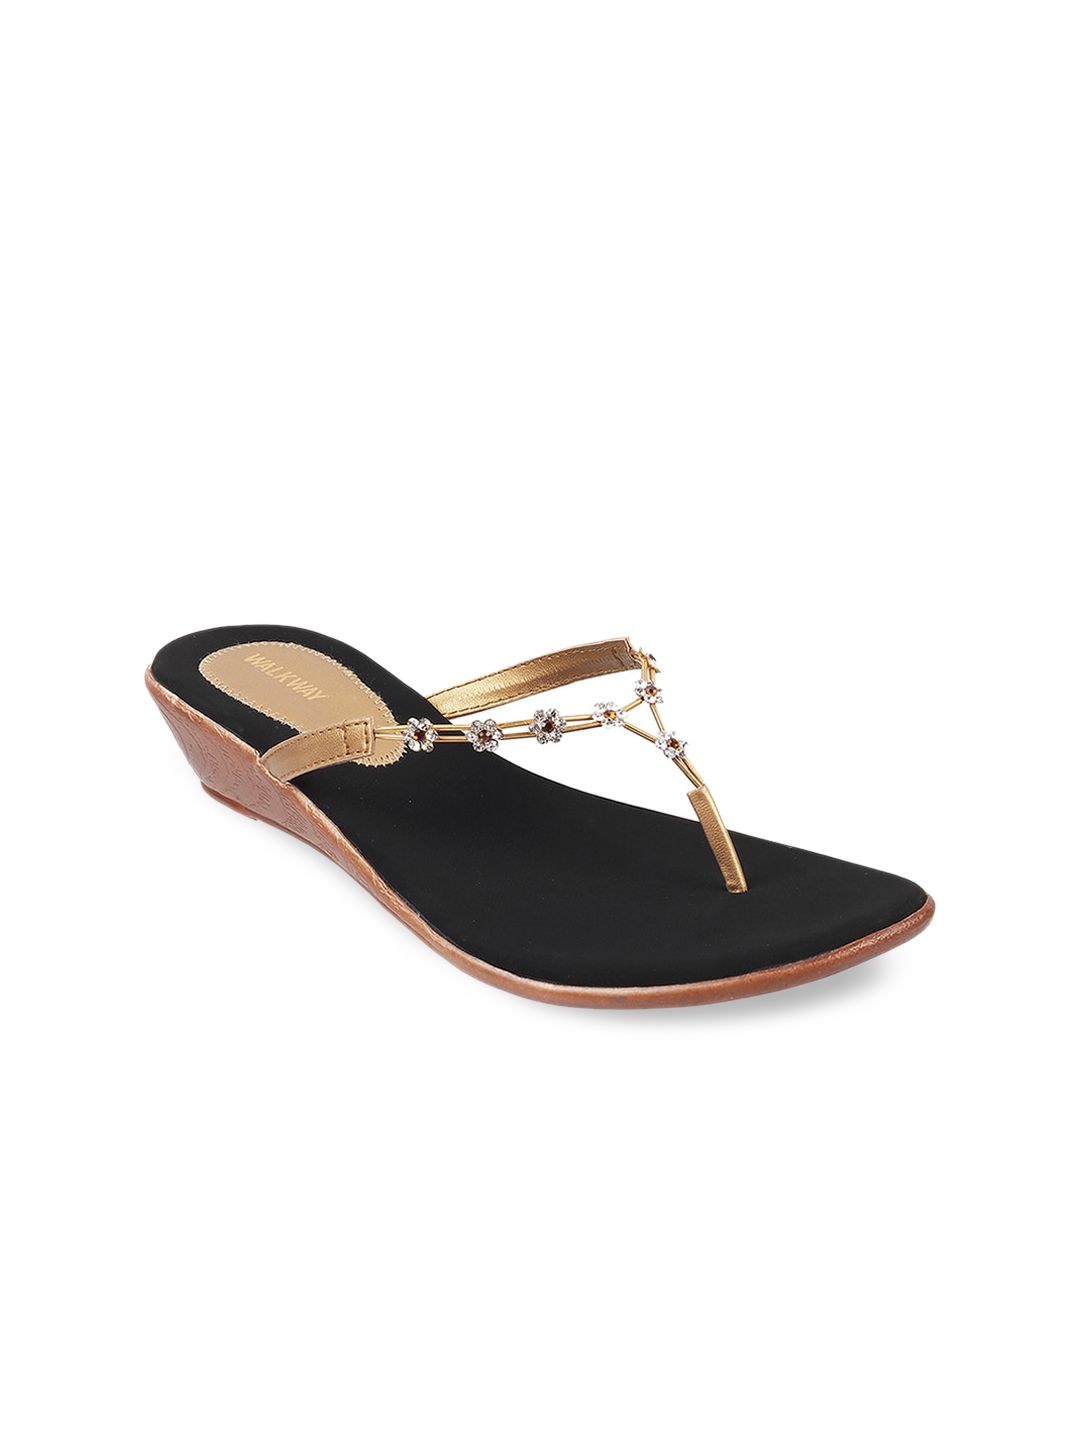 WALKWAY by Metro Gold-Toned Wedge Sandals Price in India